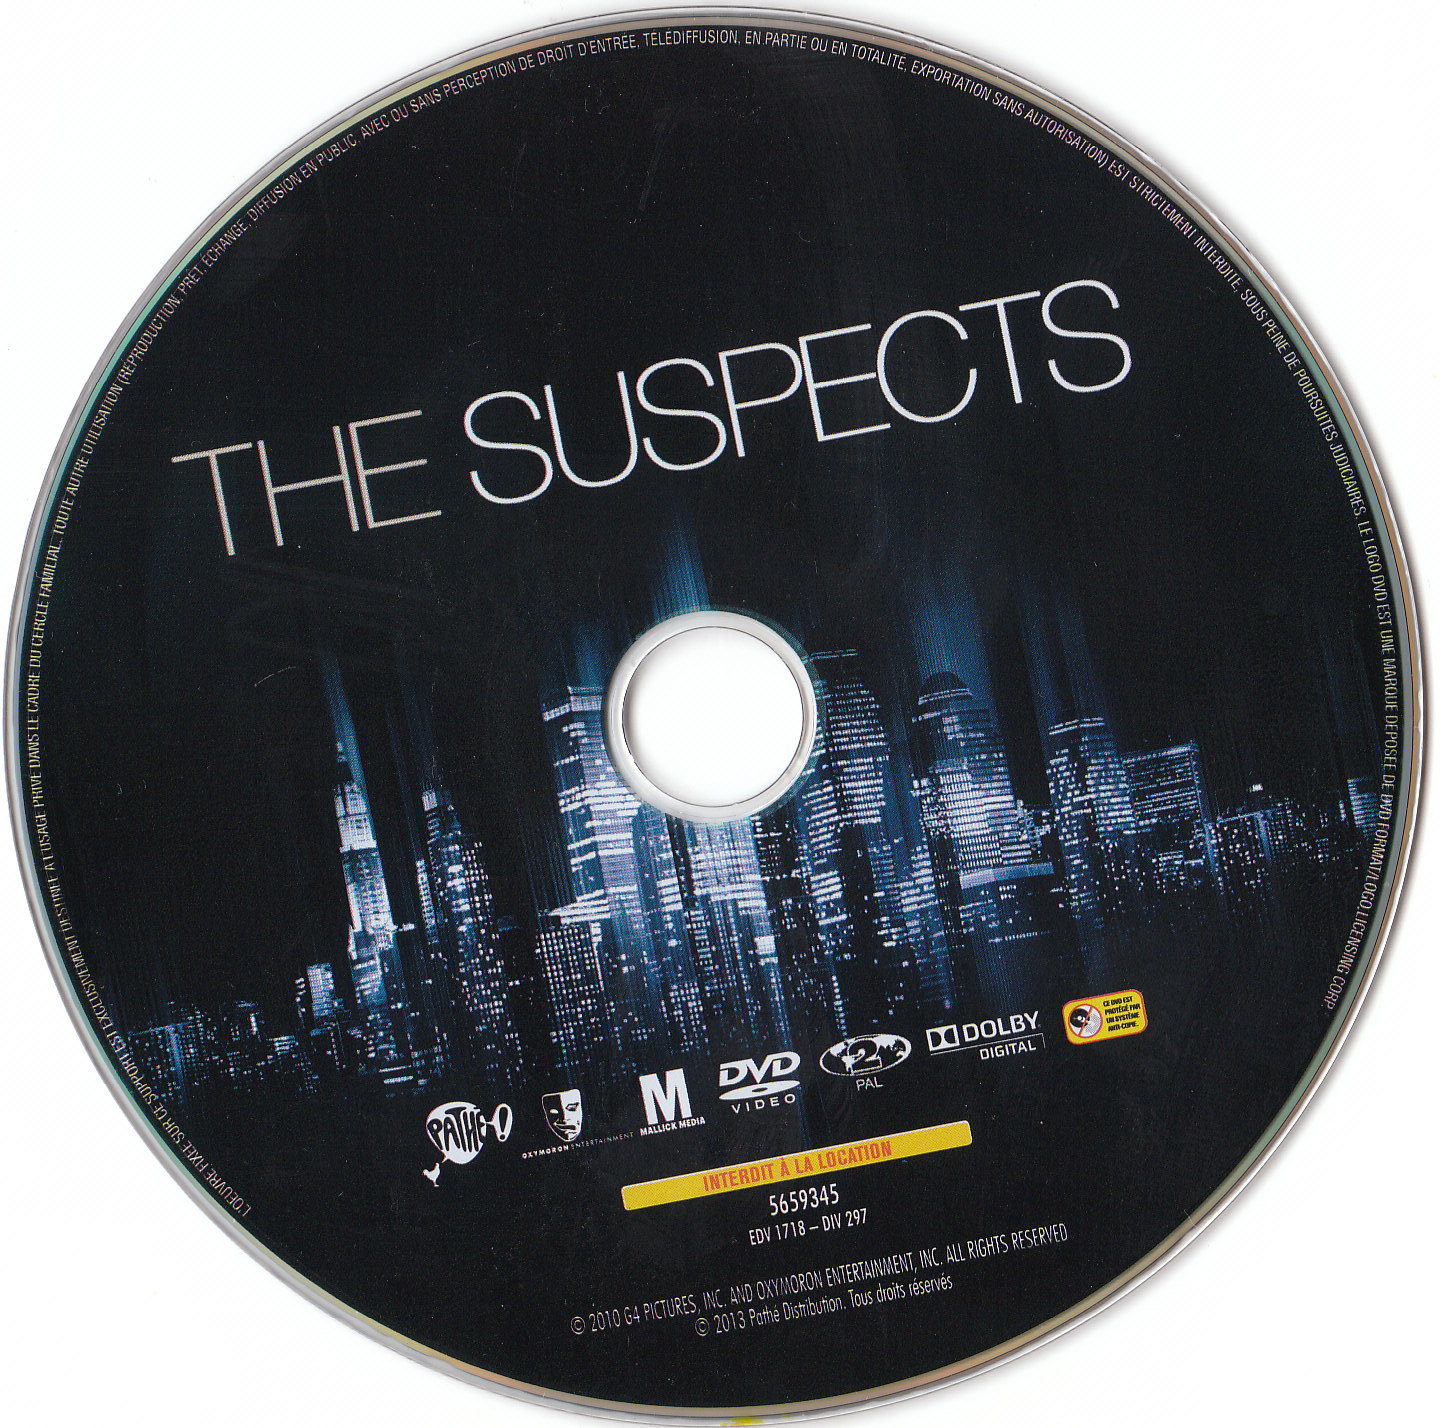 The Suspects